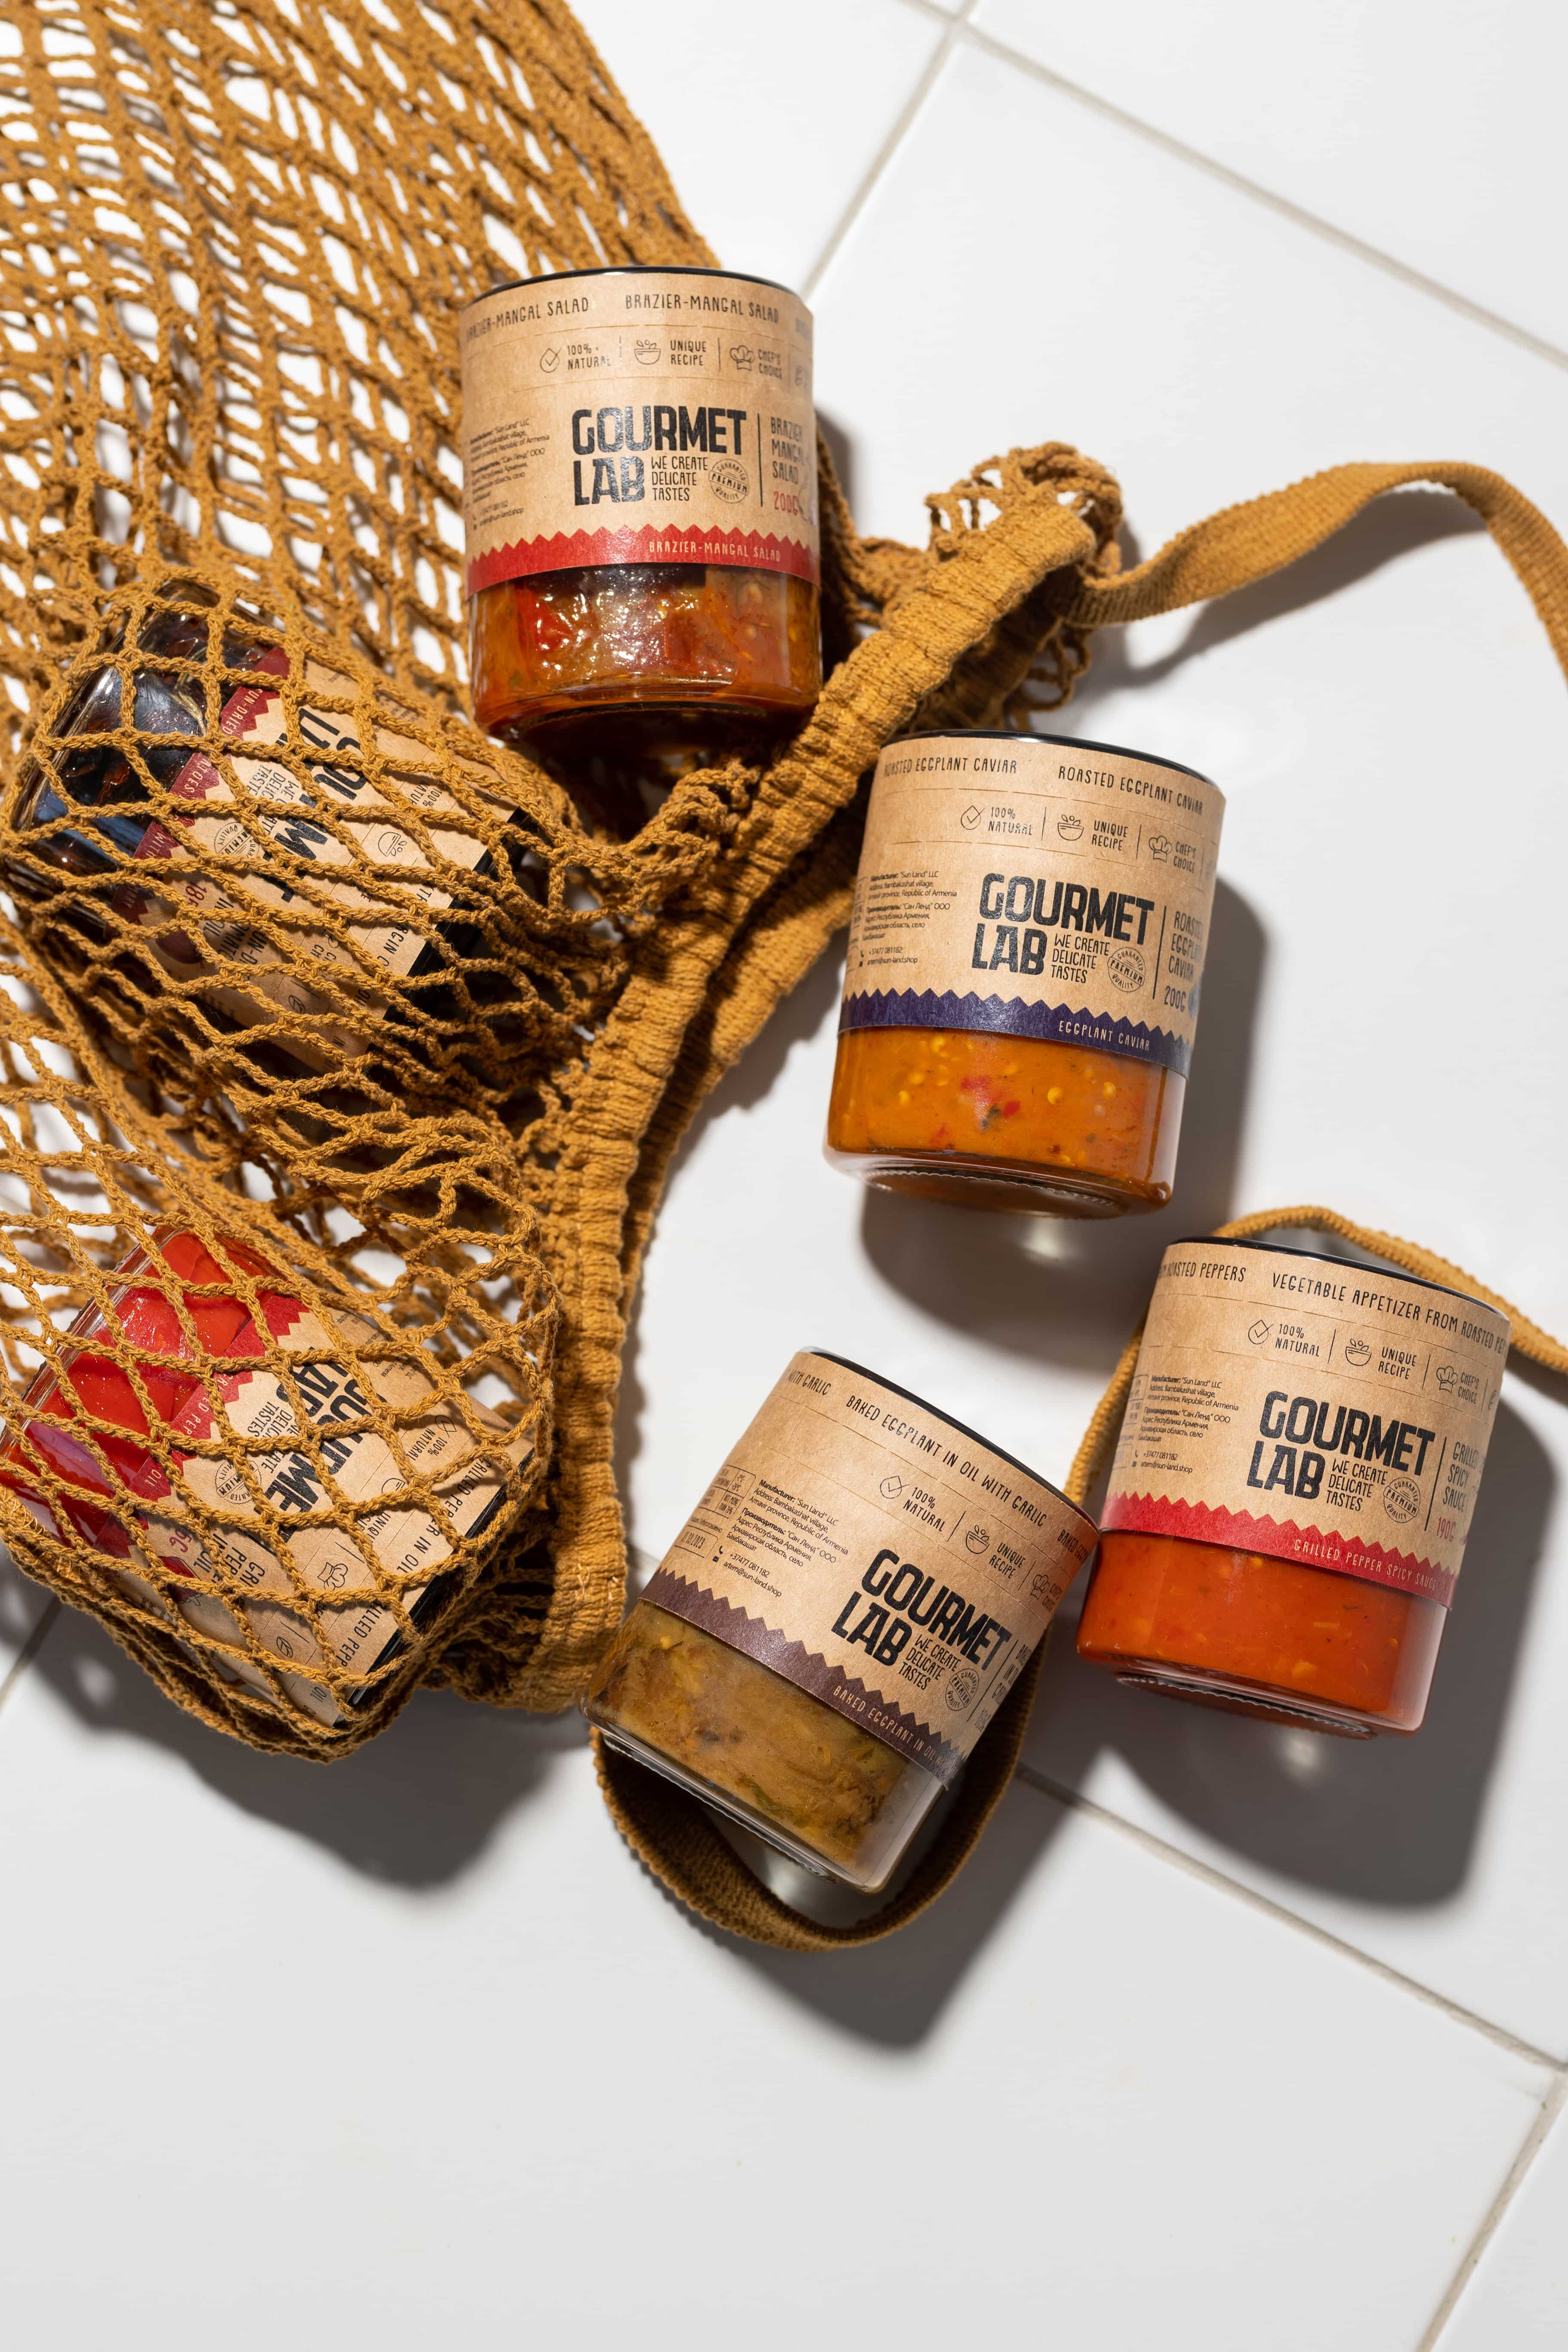 Gourmet Lab: Branding and Packaging Design by Non Gravity